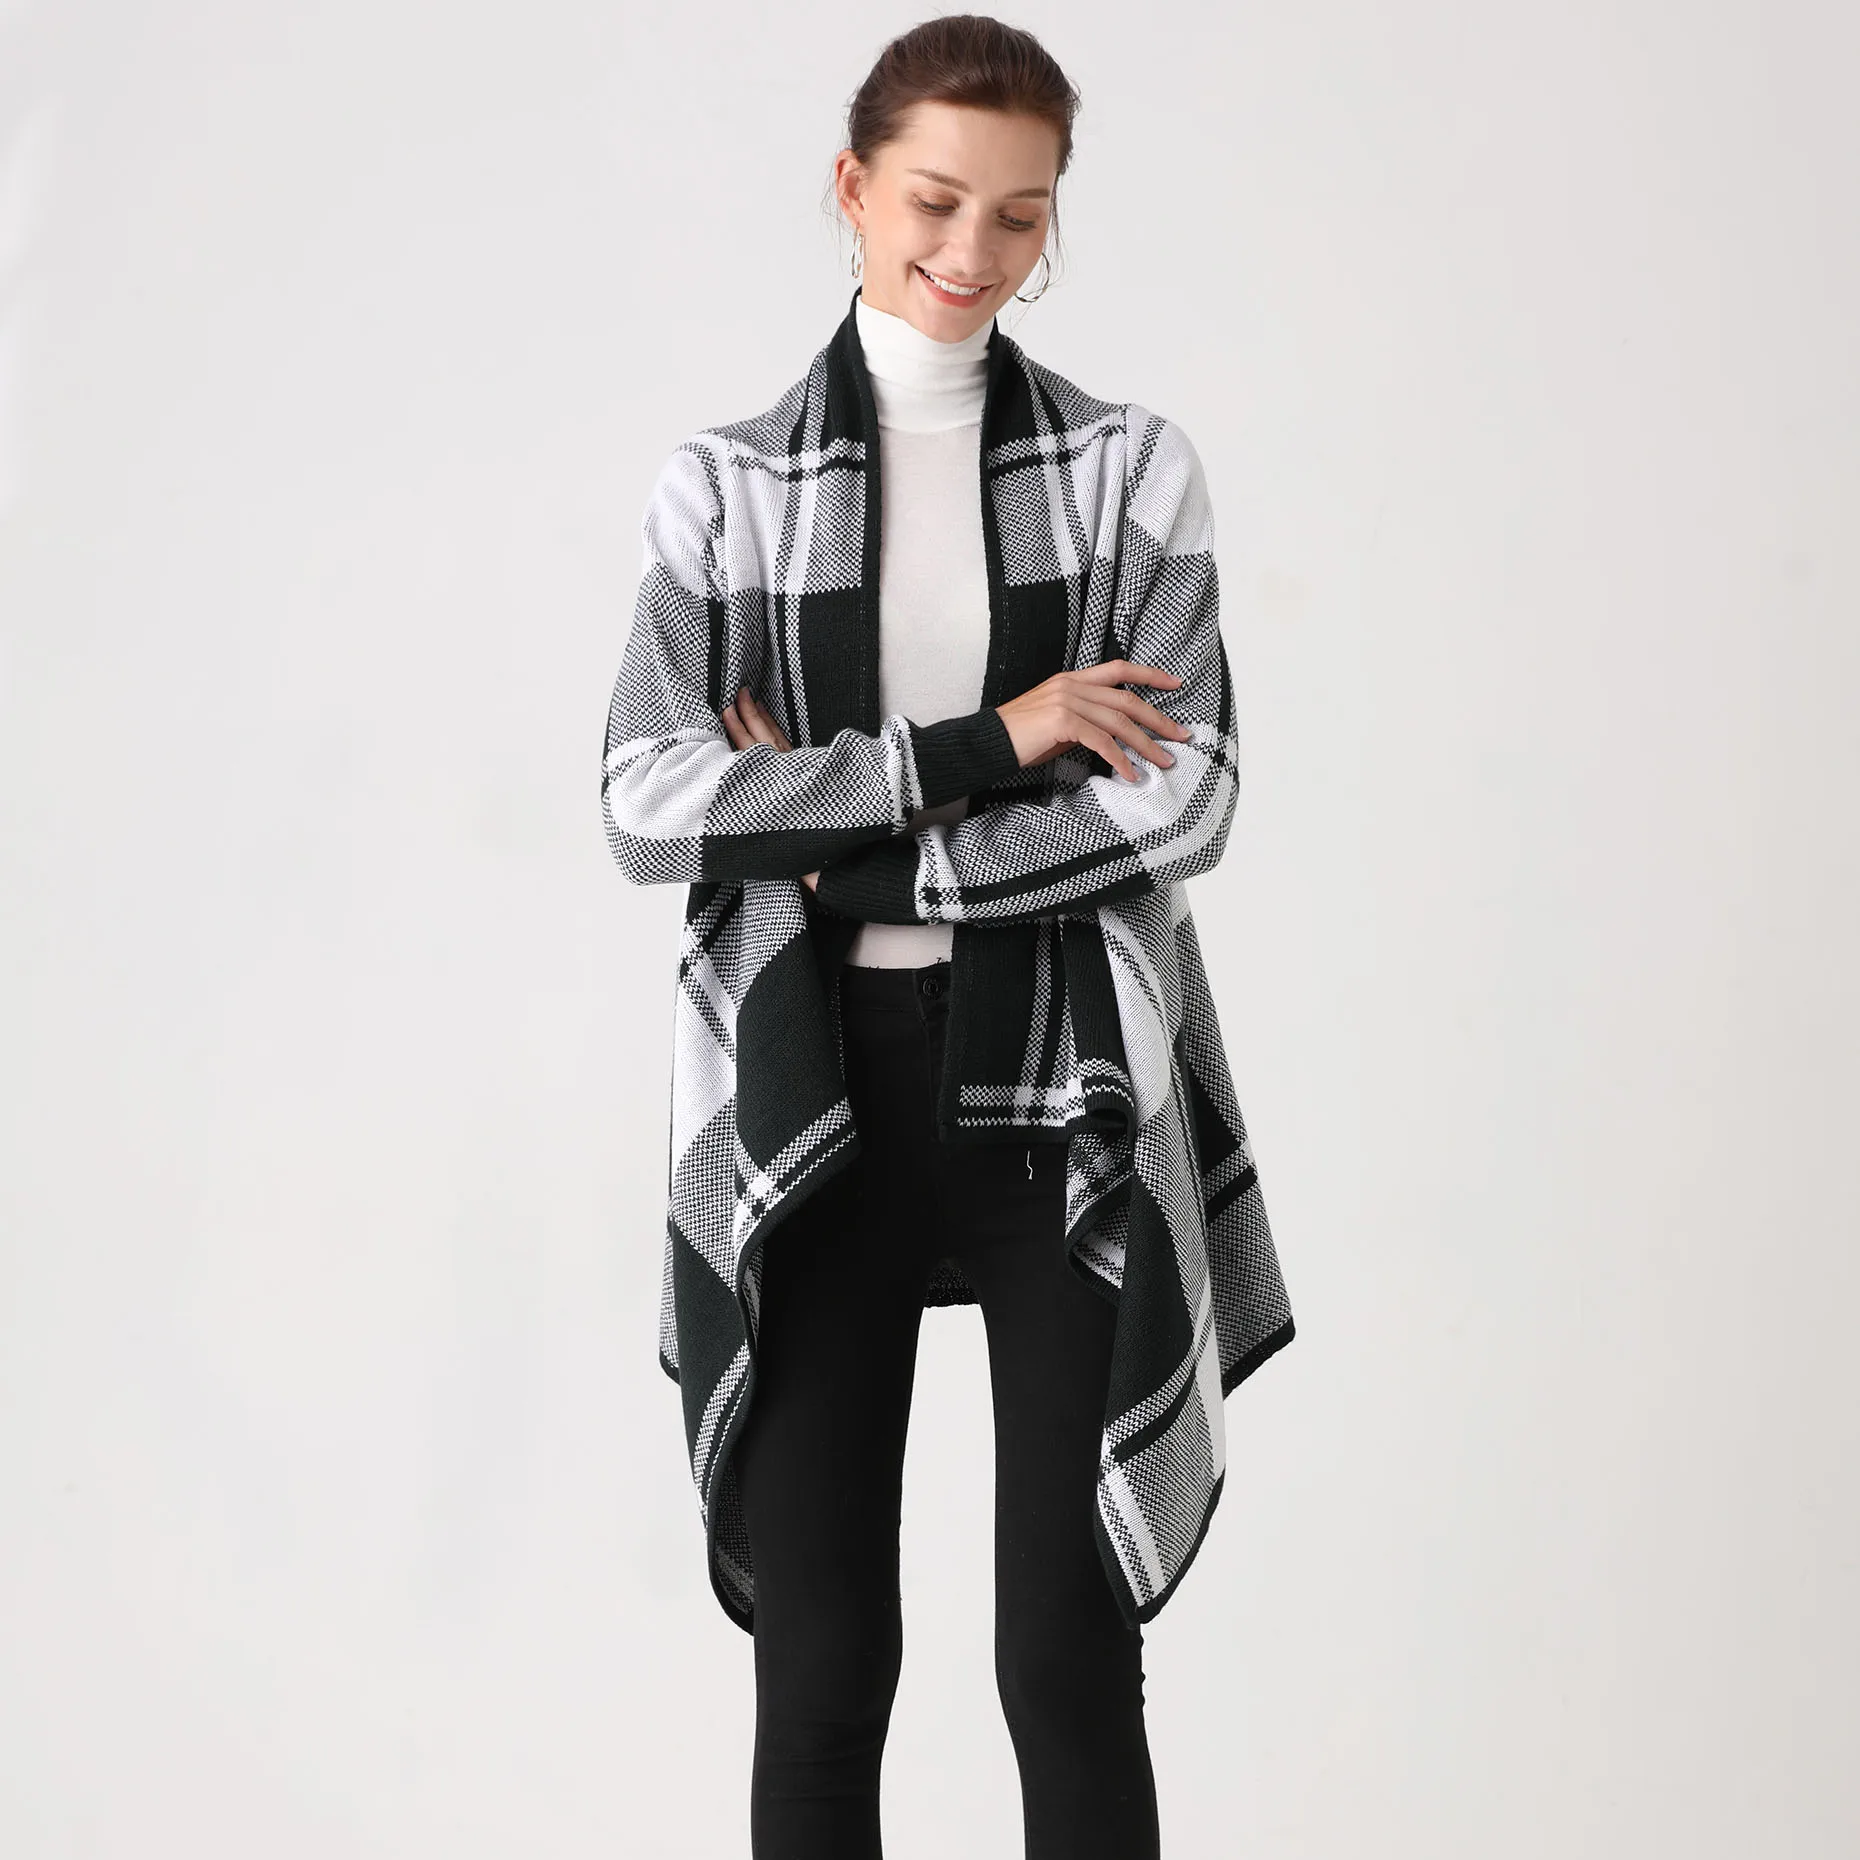 Checkerboard Jacquard Open Layering Knitwear Cardigan Leisure Poncho  Sweater - Buy Knit Poncho Sweater,Birdeye Jacquard Knitwear,Open Cardigan  Knitwear Product on Alibaba.com